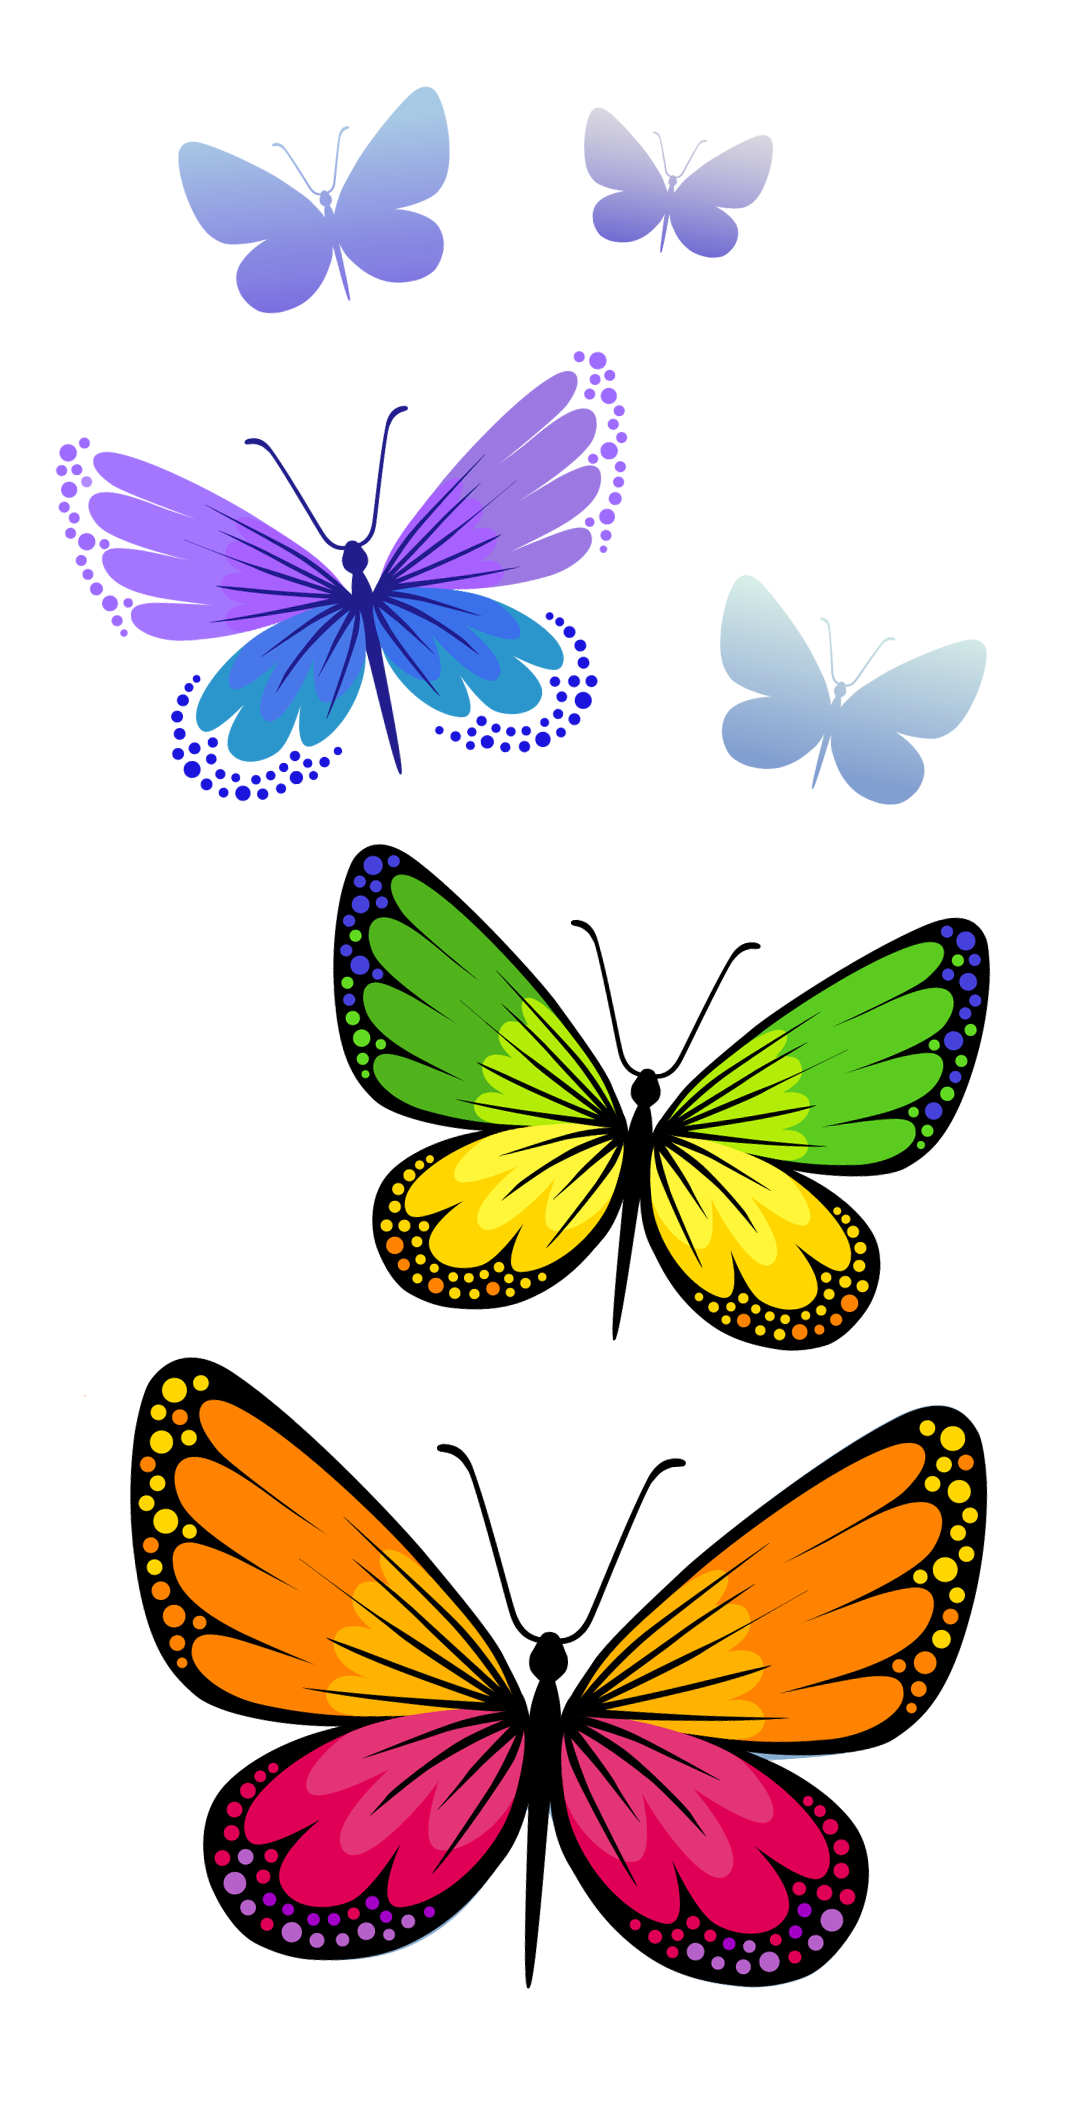 Butterflies composition png image. Vines clipart butterfly